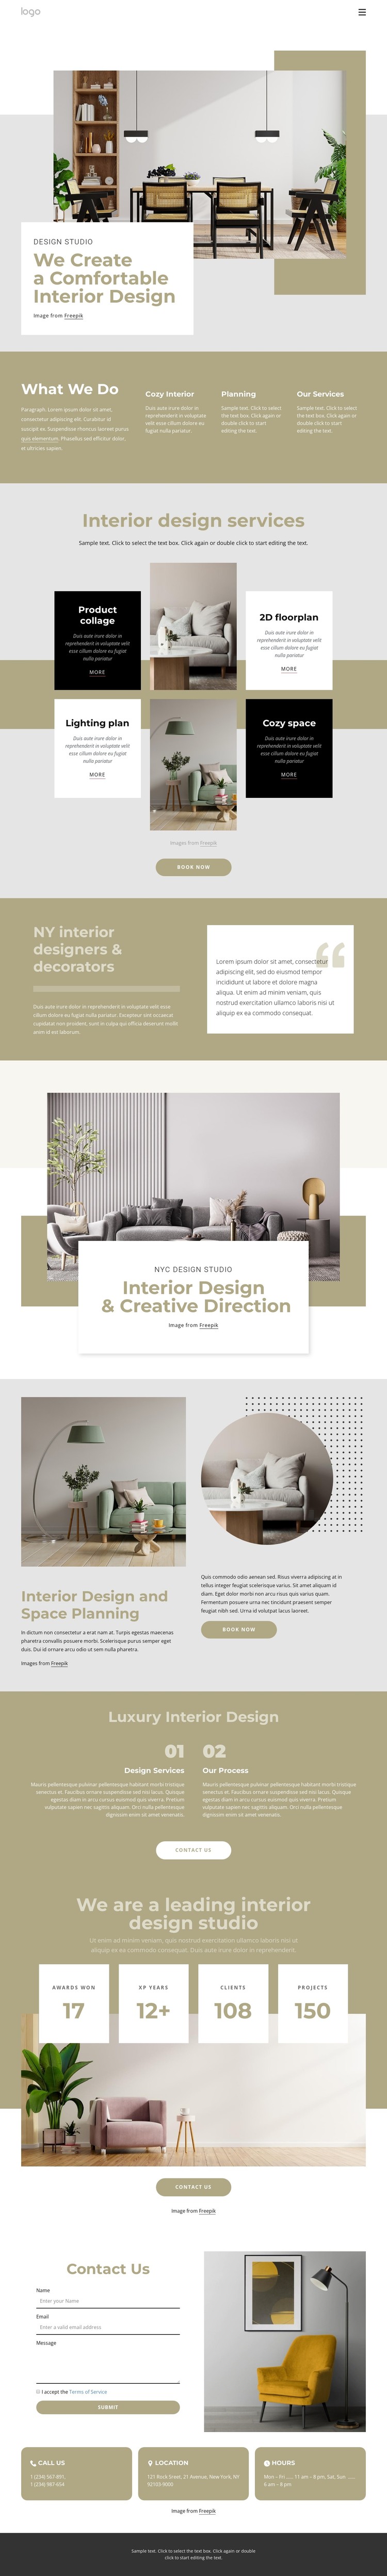 We create a comfortable interiors CSS Template